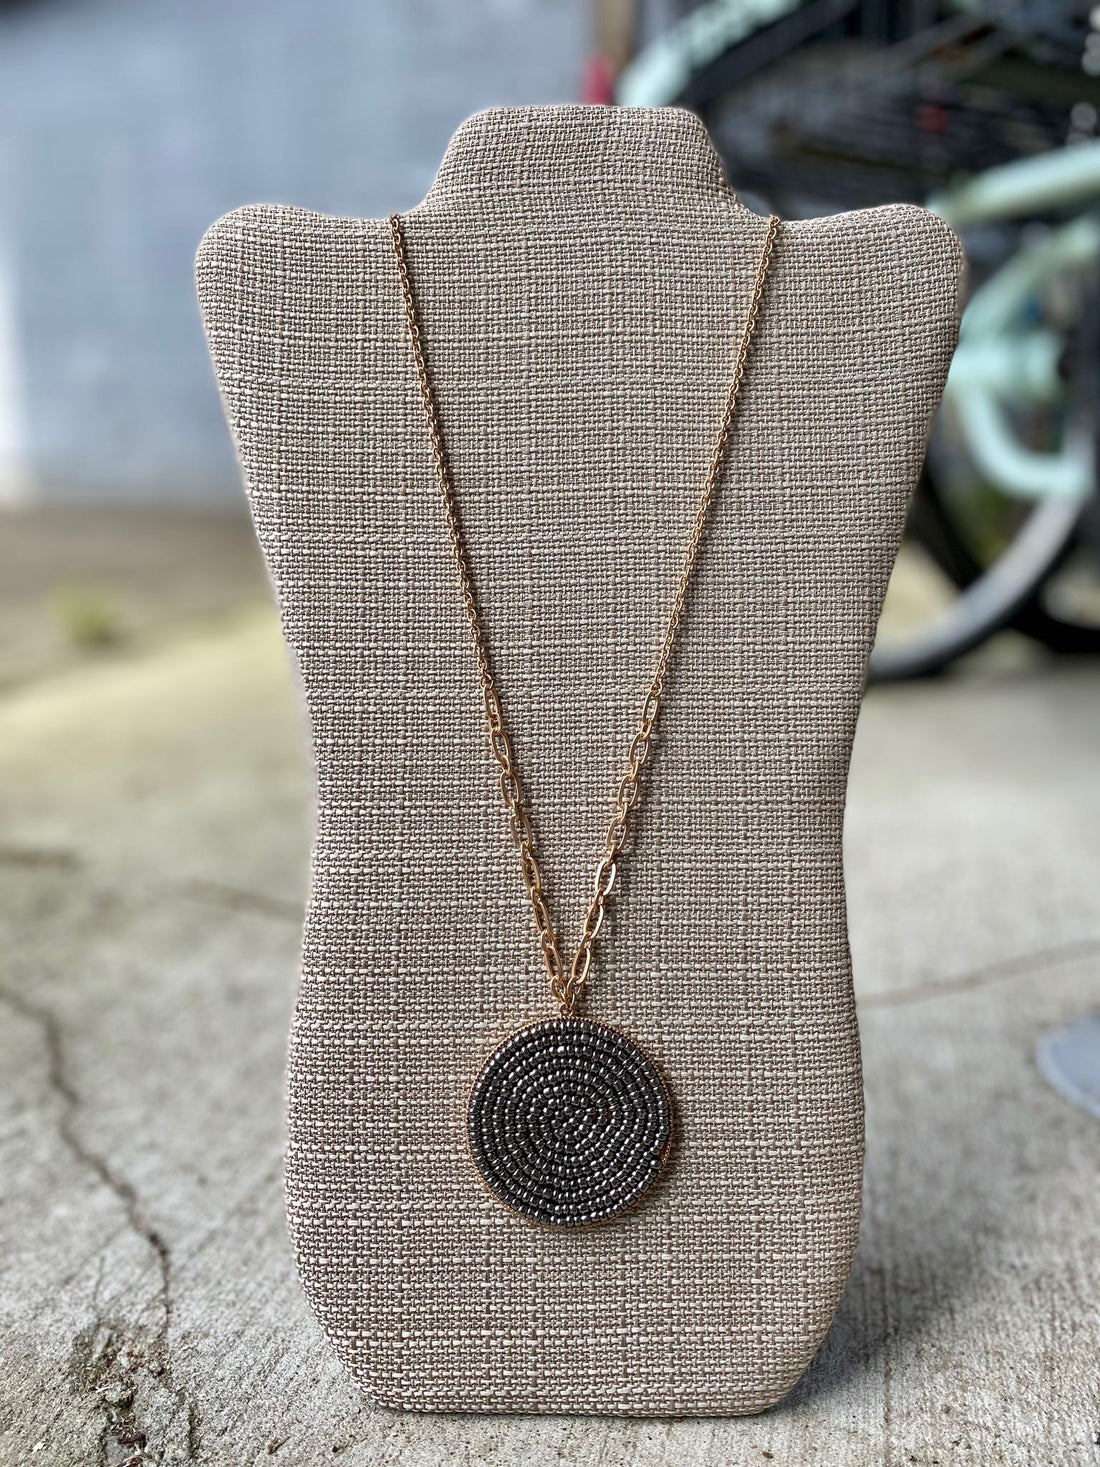 Beaded Disc Necklace